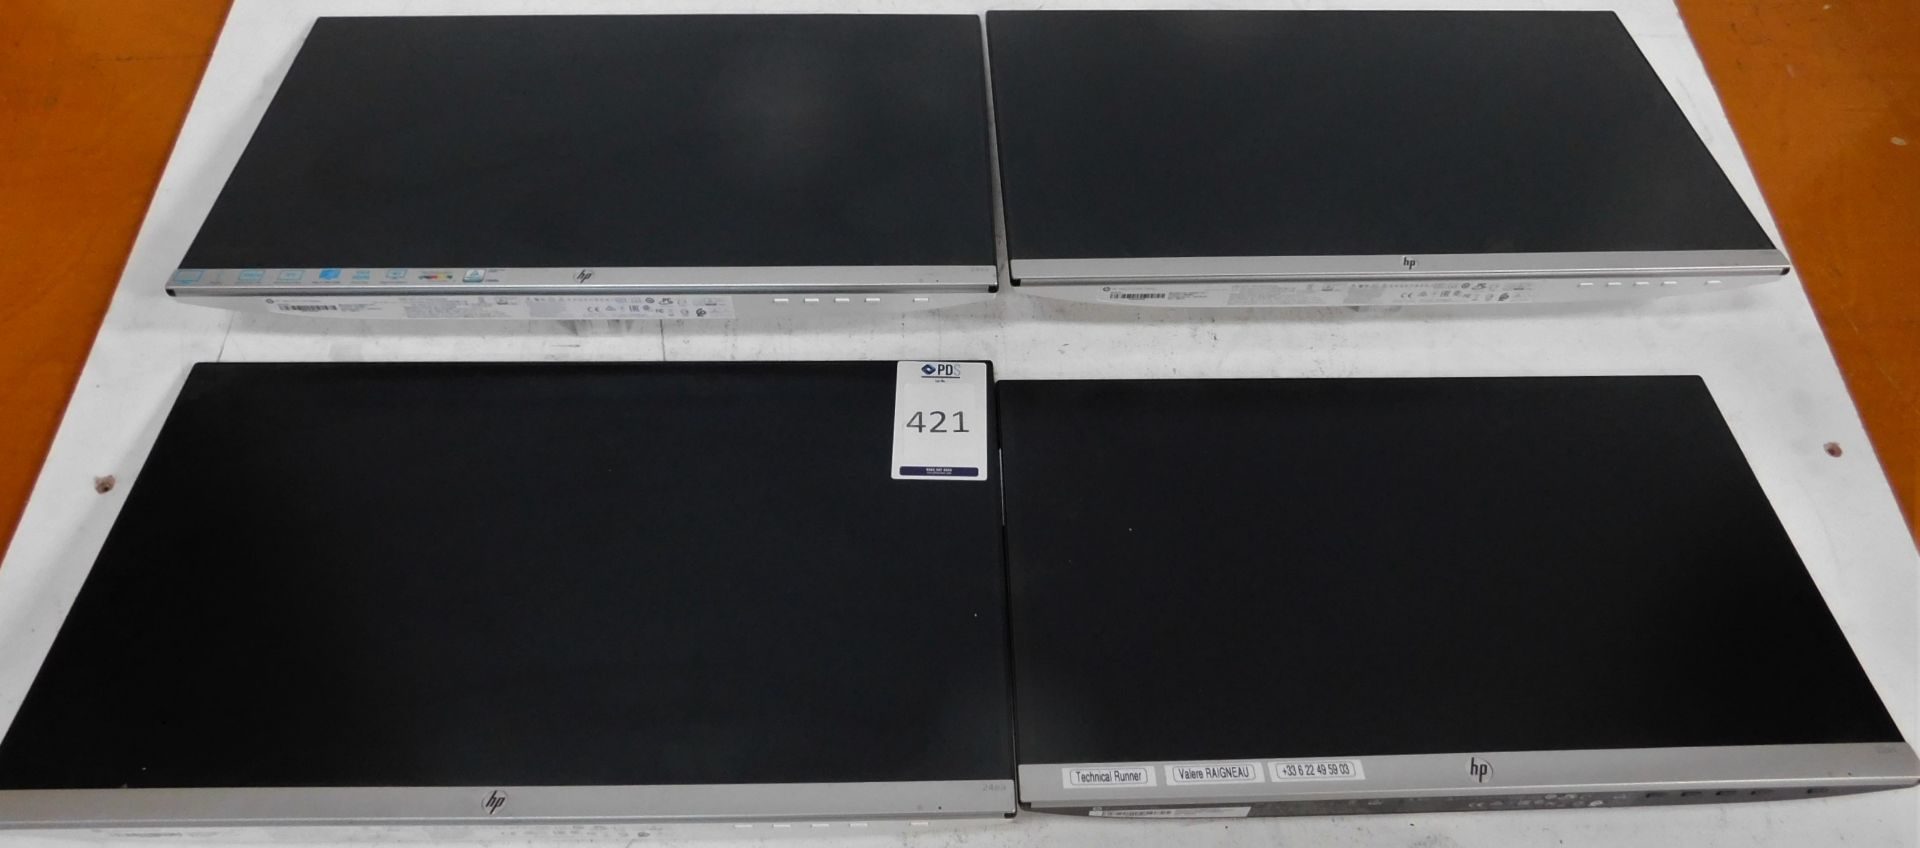 Four Hewlett Packard 22es 21.5” Monitors (Location: Brentwood. Please Refer to General Notes)